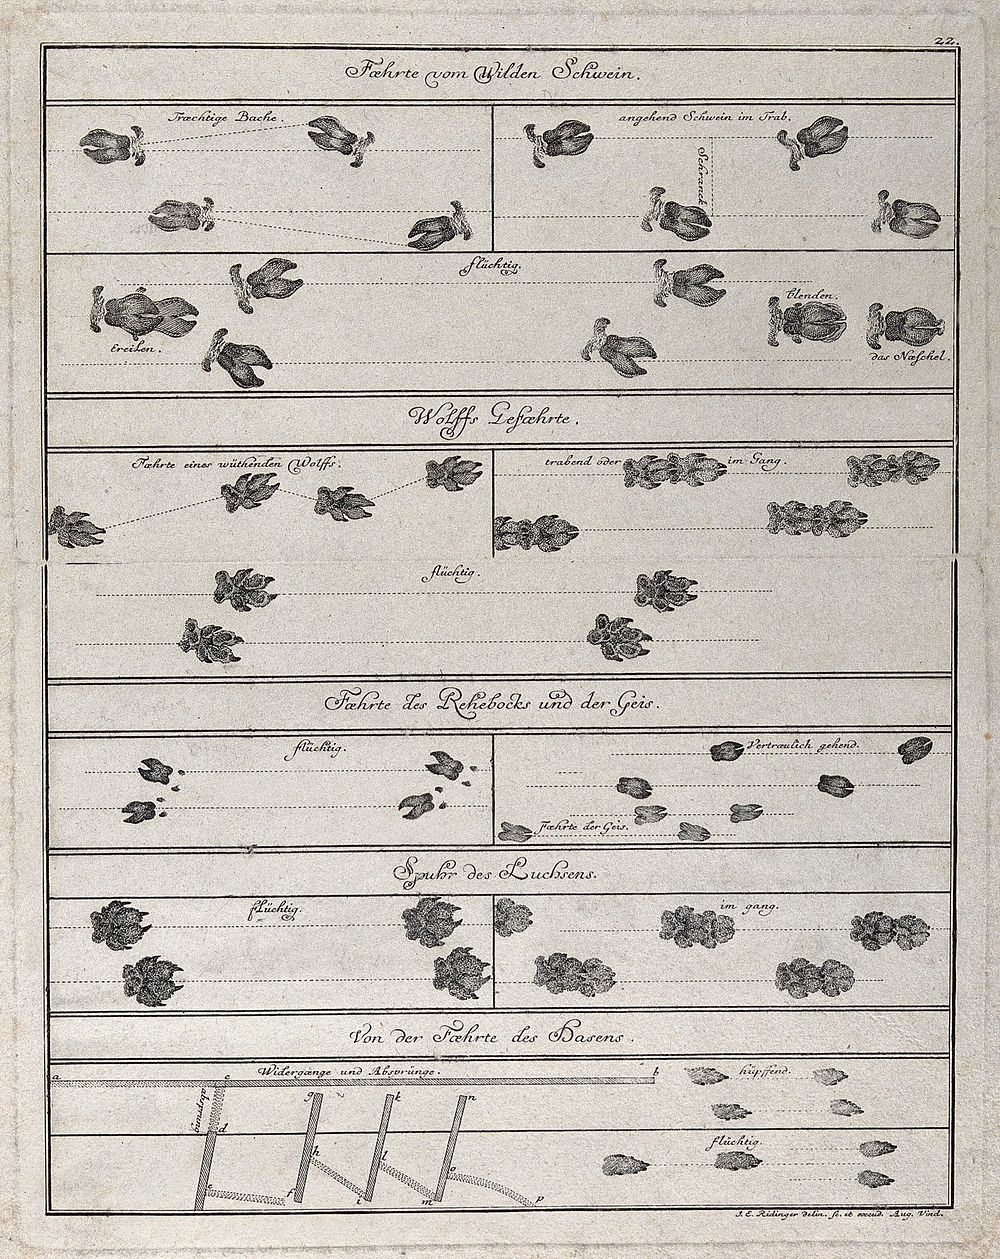 Various sets of animal tracks in one table, including those of wild boar, wolves, goats, lynx and hares. Etching by J. E.…